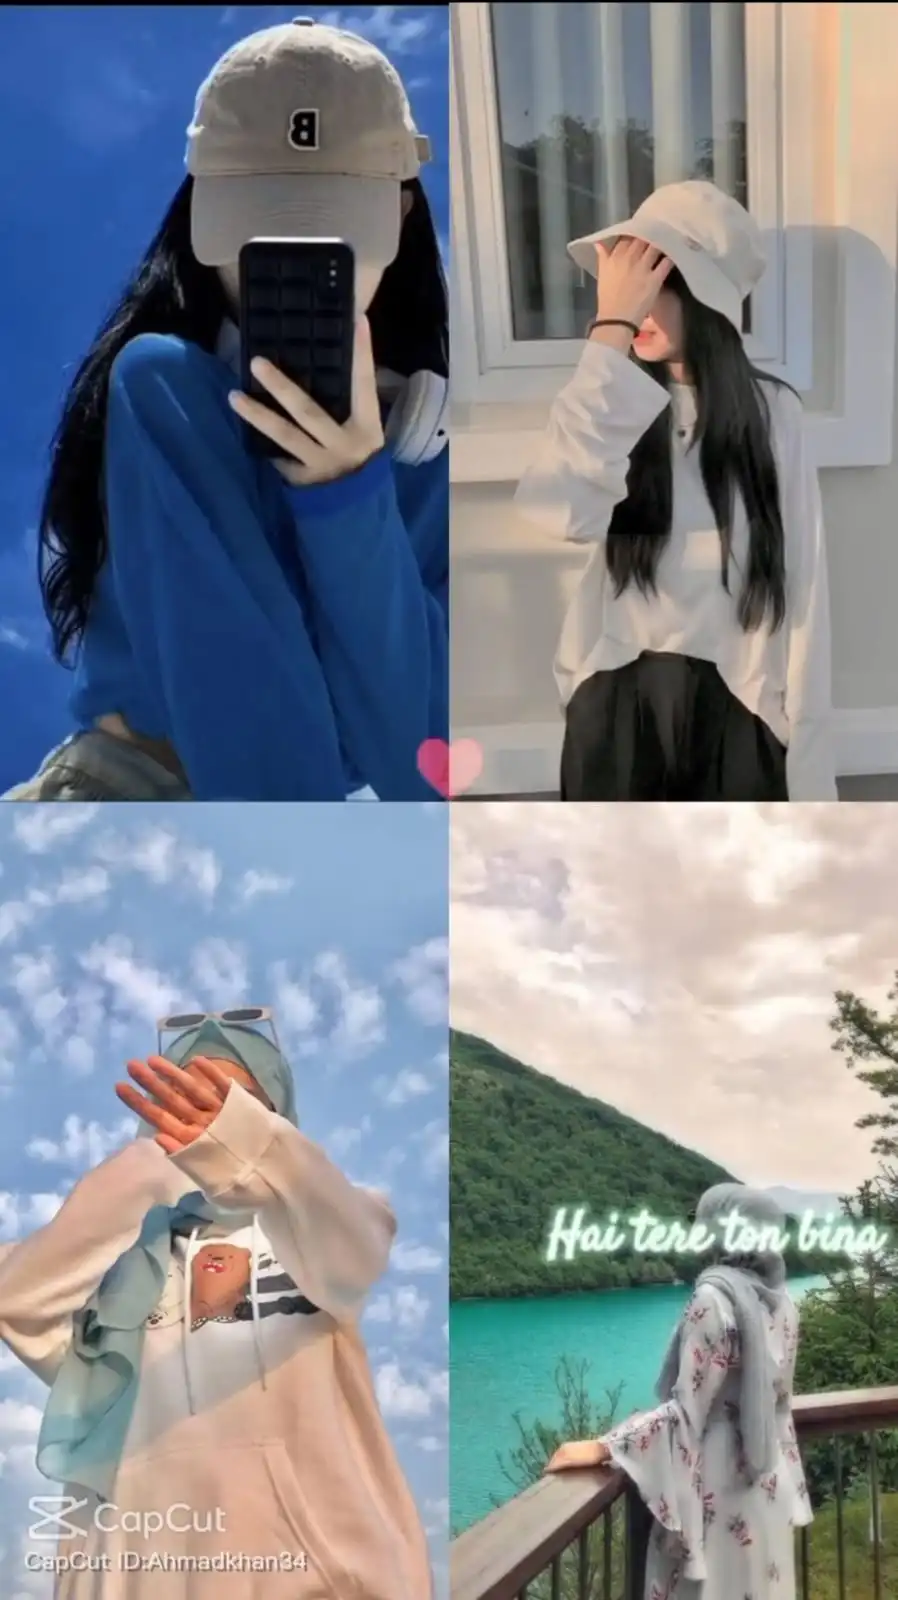 A collage of four images showcasing the 'Tu Hi Mera Dil CapCut Template.' The top left photo shows a person in a blue sweater and beige baseball cap, covering their face with a phone. In the top right, the person is seen adjusting a white bucket hat, wearing a white shirt and black pants. The bottom left image captures hands reaching towards the sky, with a filter of clouds, and the bottom right features a person in a white shirt and blue jacket by a turquoise lake, with the text "Hai tere ton bina" superimposed. Each image reflects a soft, aesthetic quality typical of CapCut video templates.